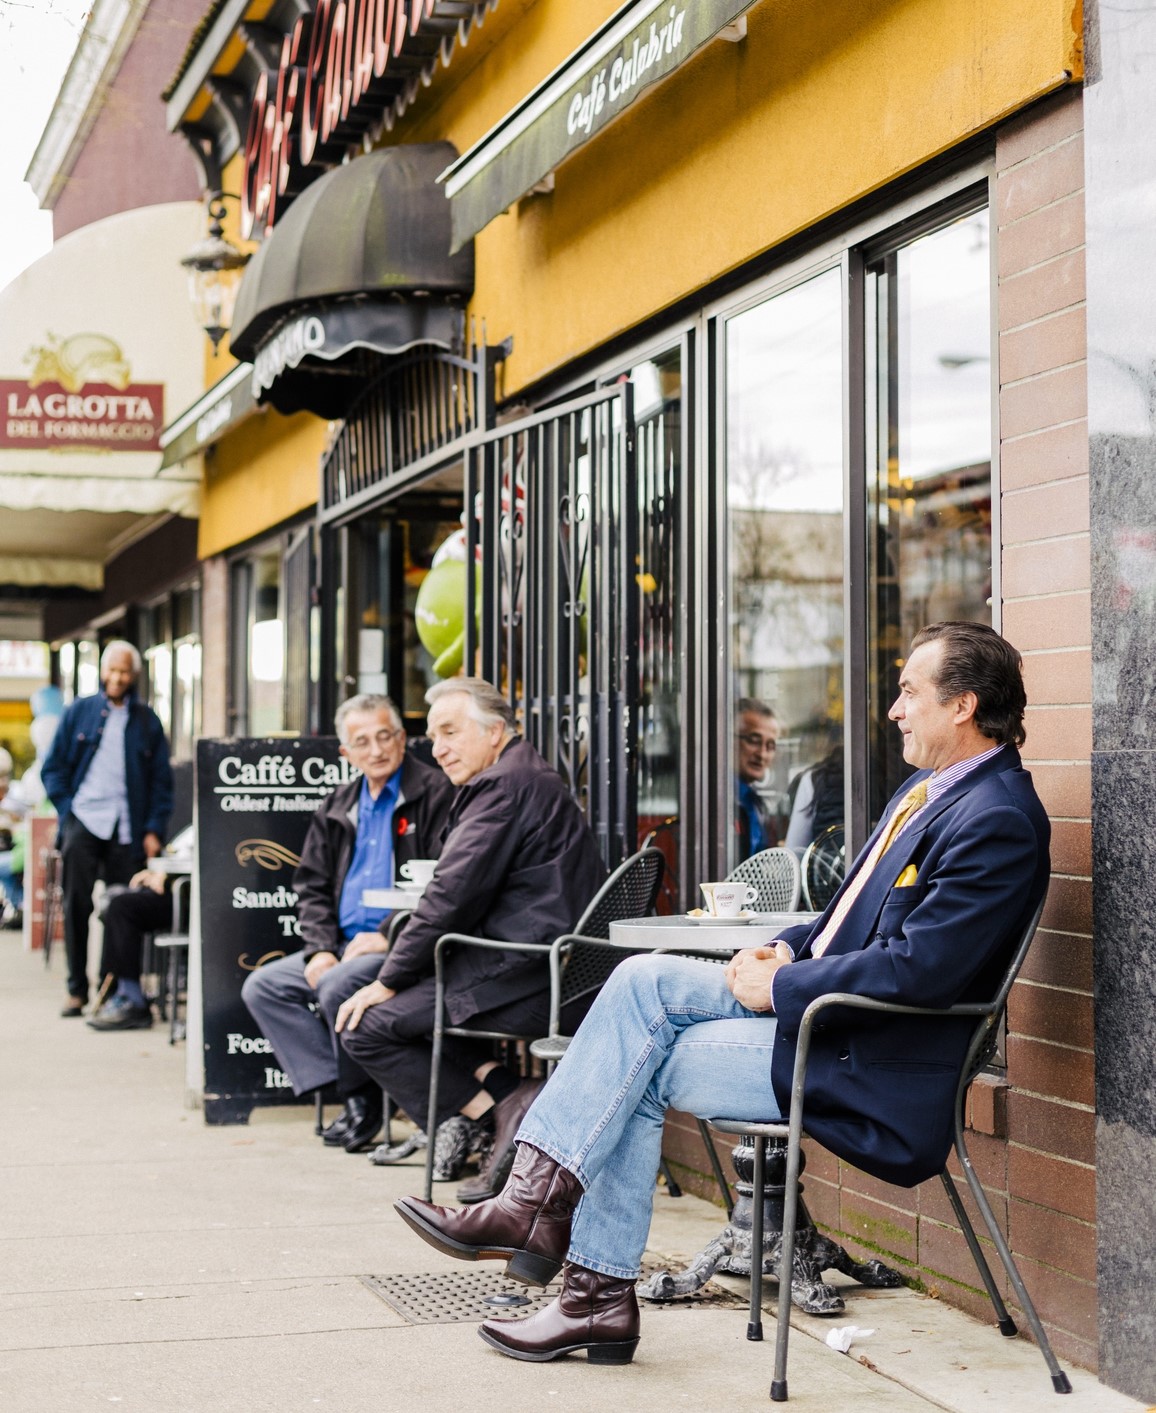 Sidewalk patio on Commercial Drive of an Italian cafe | Tourism Vancouver/Nelson Mouellic